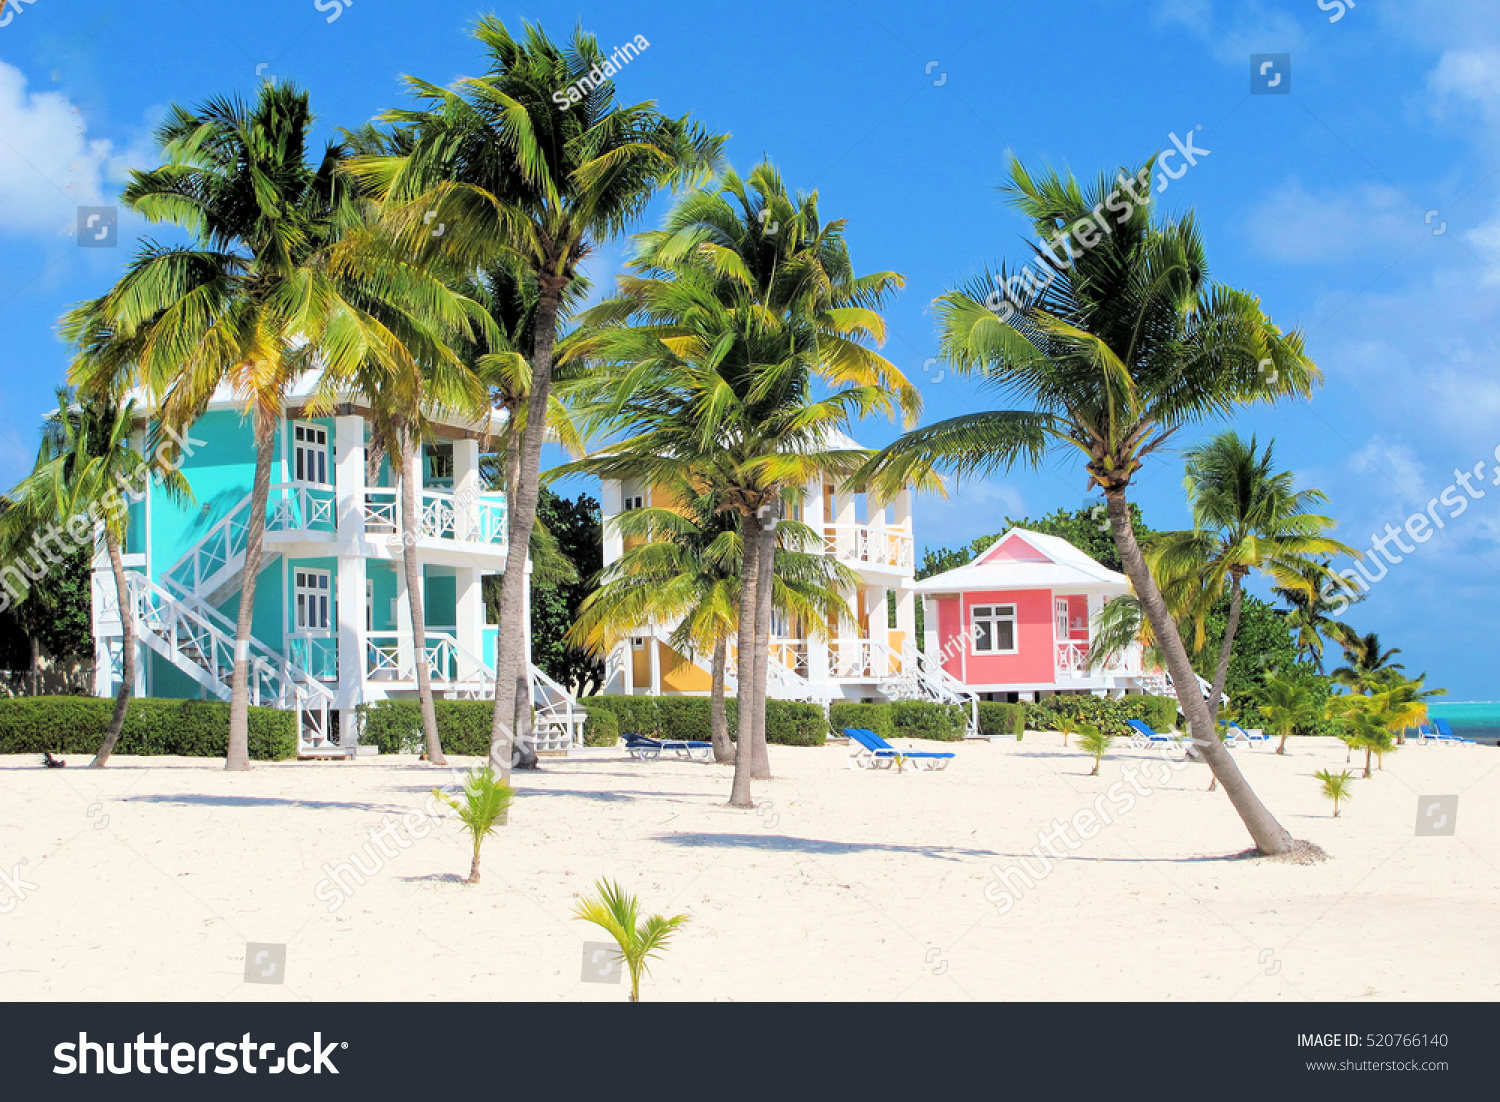 151,372 Coloured beach houses Images, Stock Photos & Vectors | Shutterstock